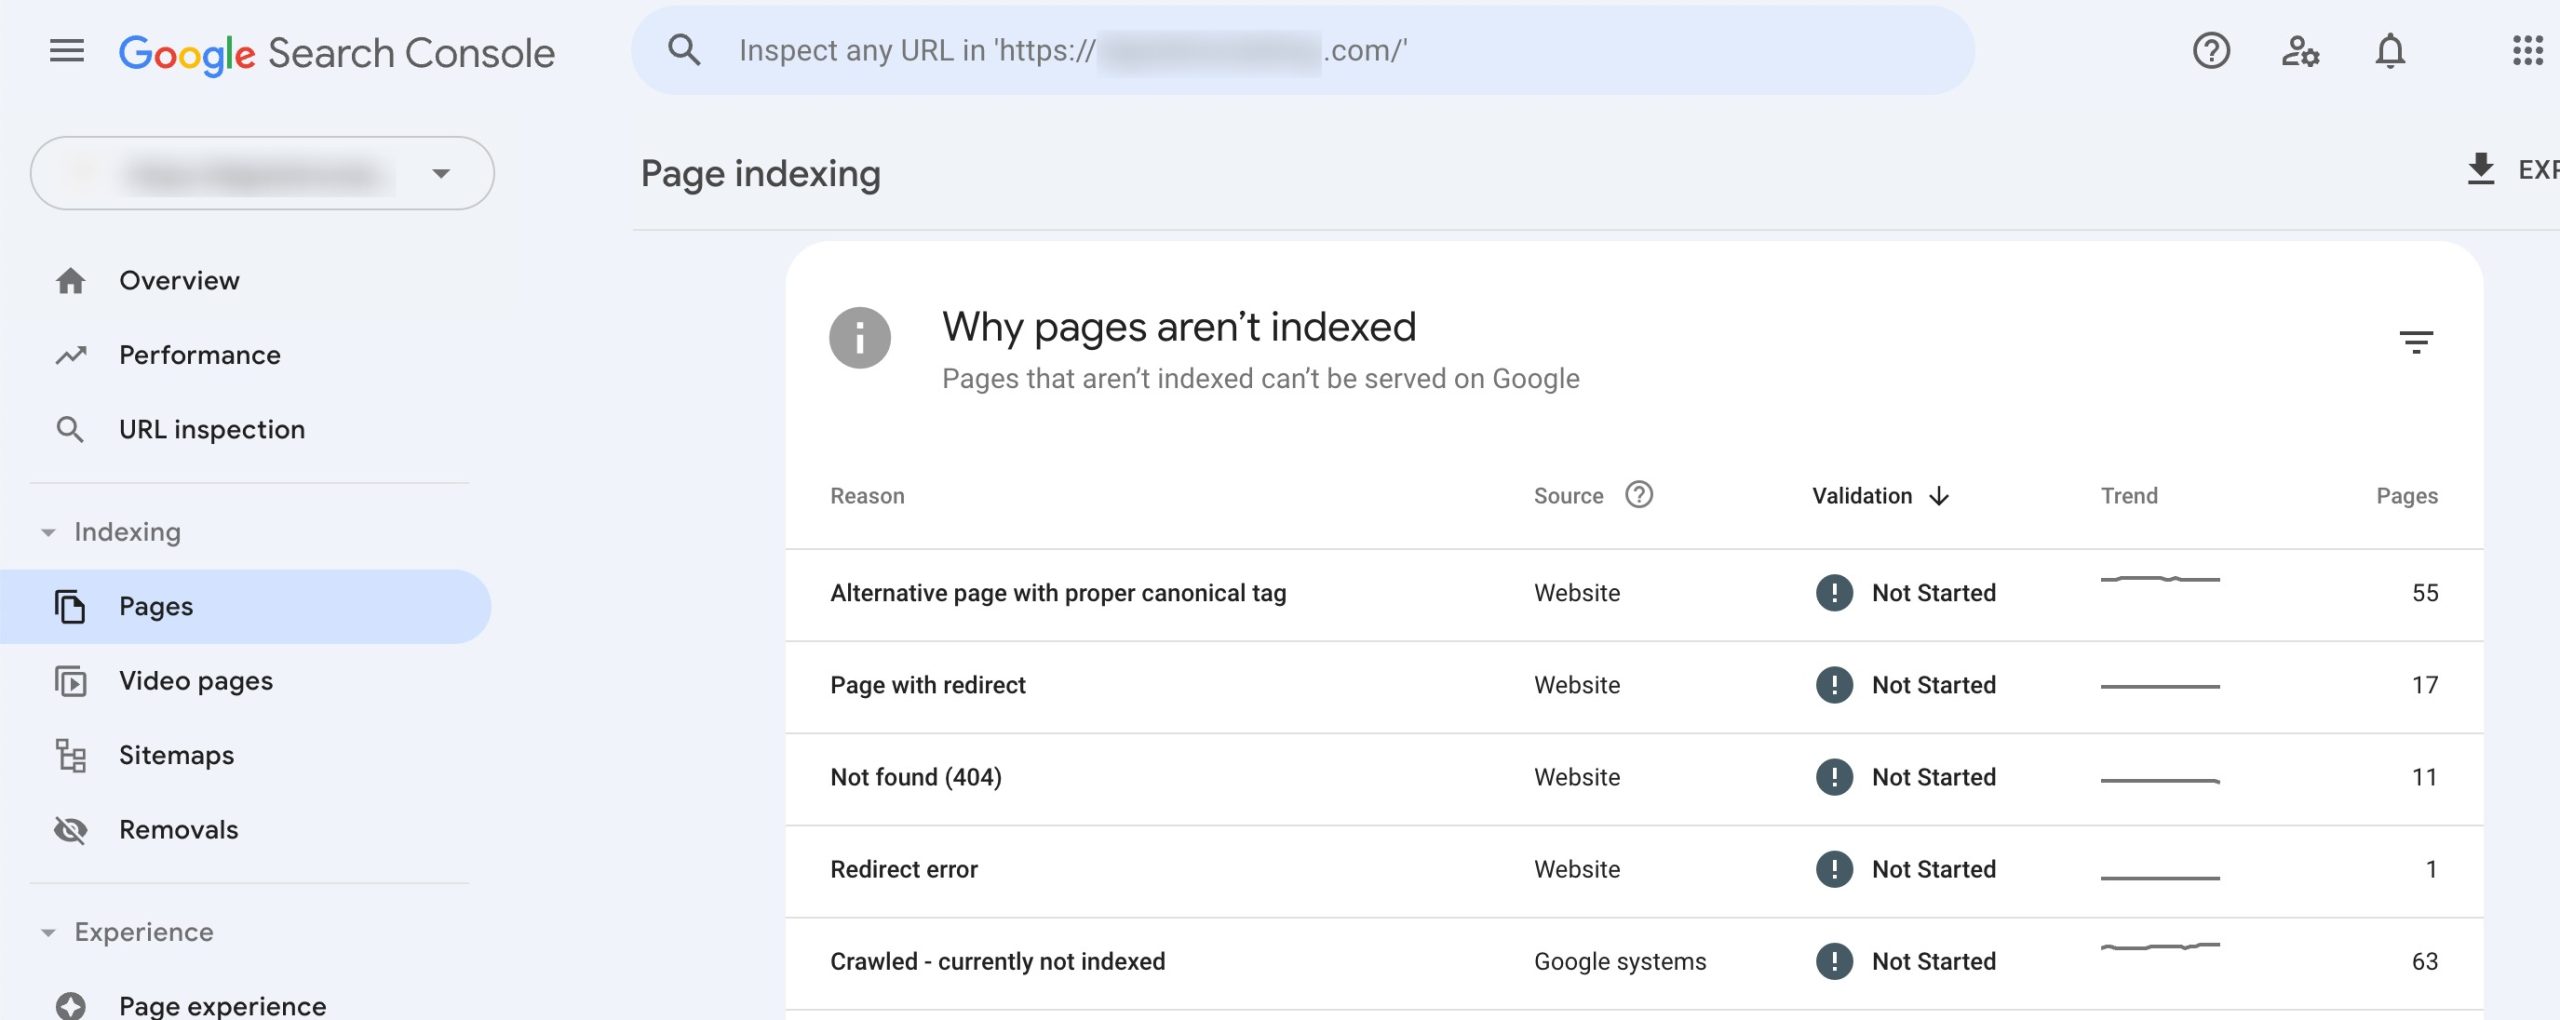 Pages section in Google Search Console